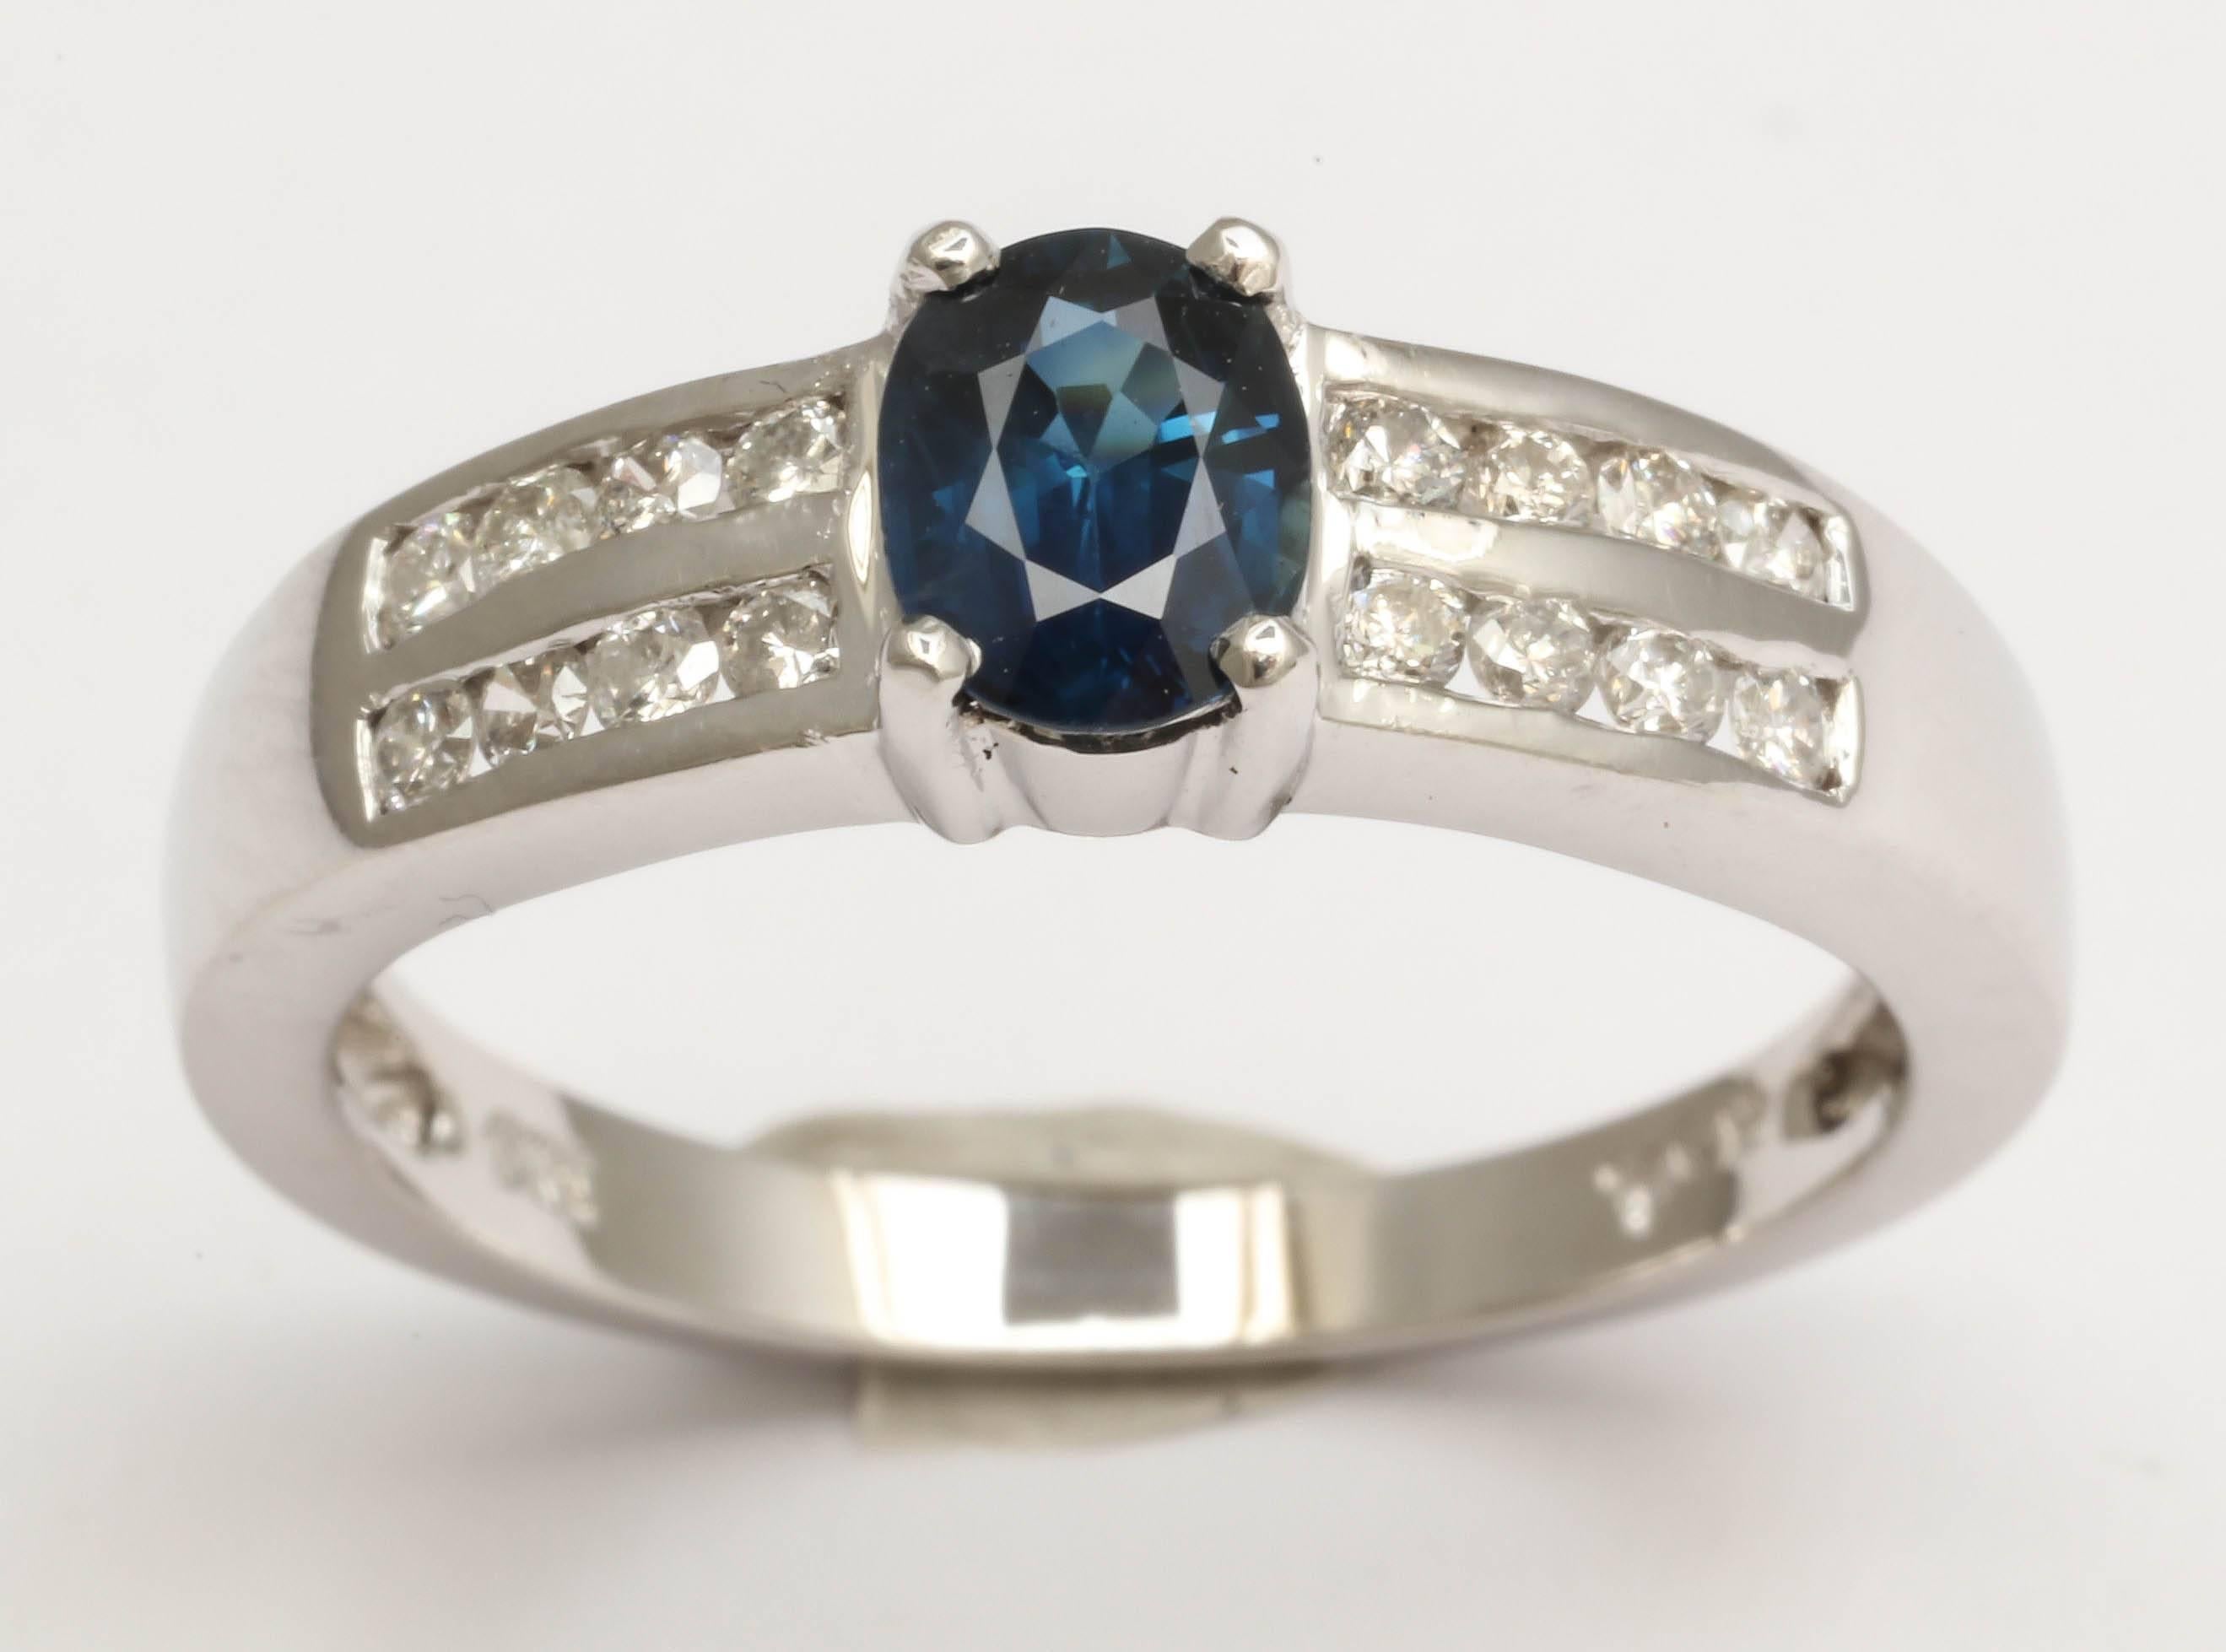 Beautiful blue oval sapphire, 4 X 6 mm., is flanked on both sides by 16 diamonds channel set on the shank. This ring is a size 7 and can be sized.